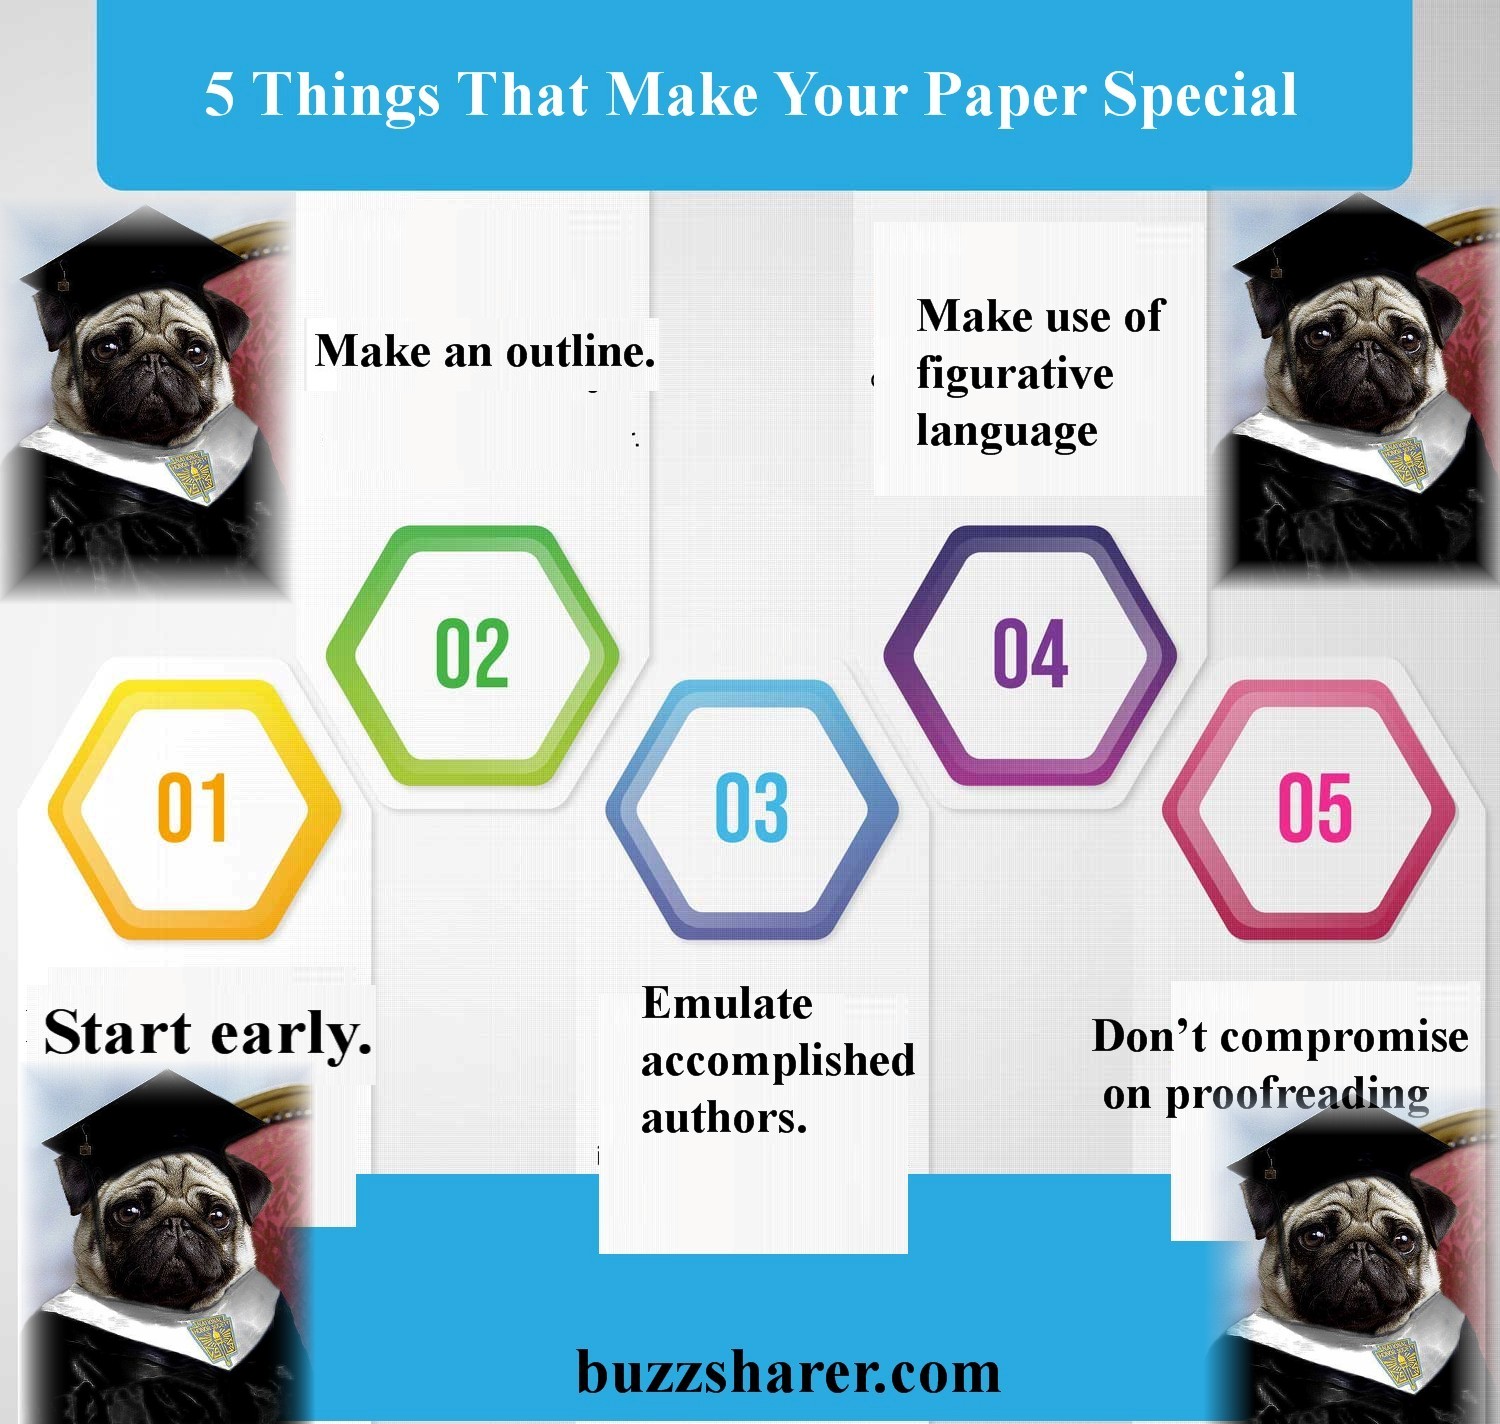 How to Write an Essay about Your Pet Perfectly. Essay Structure 1